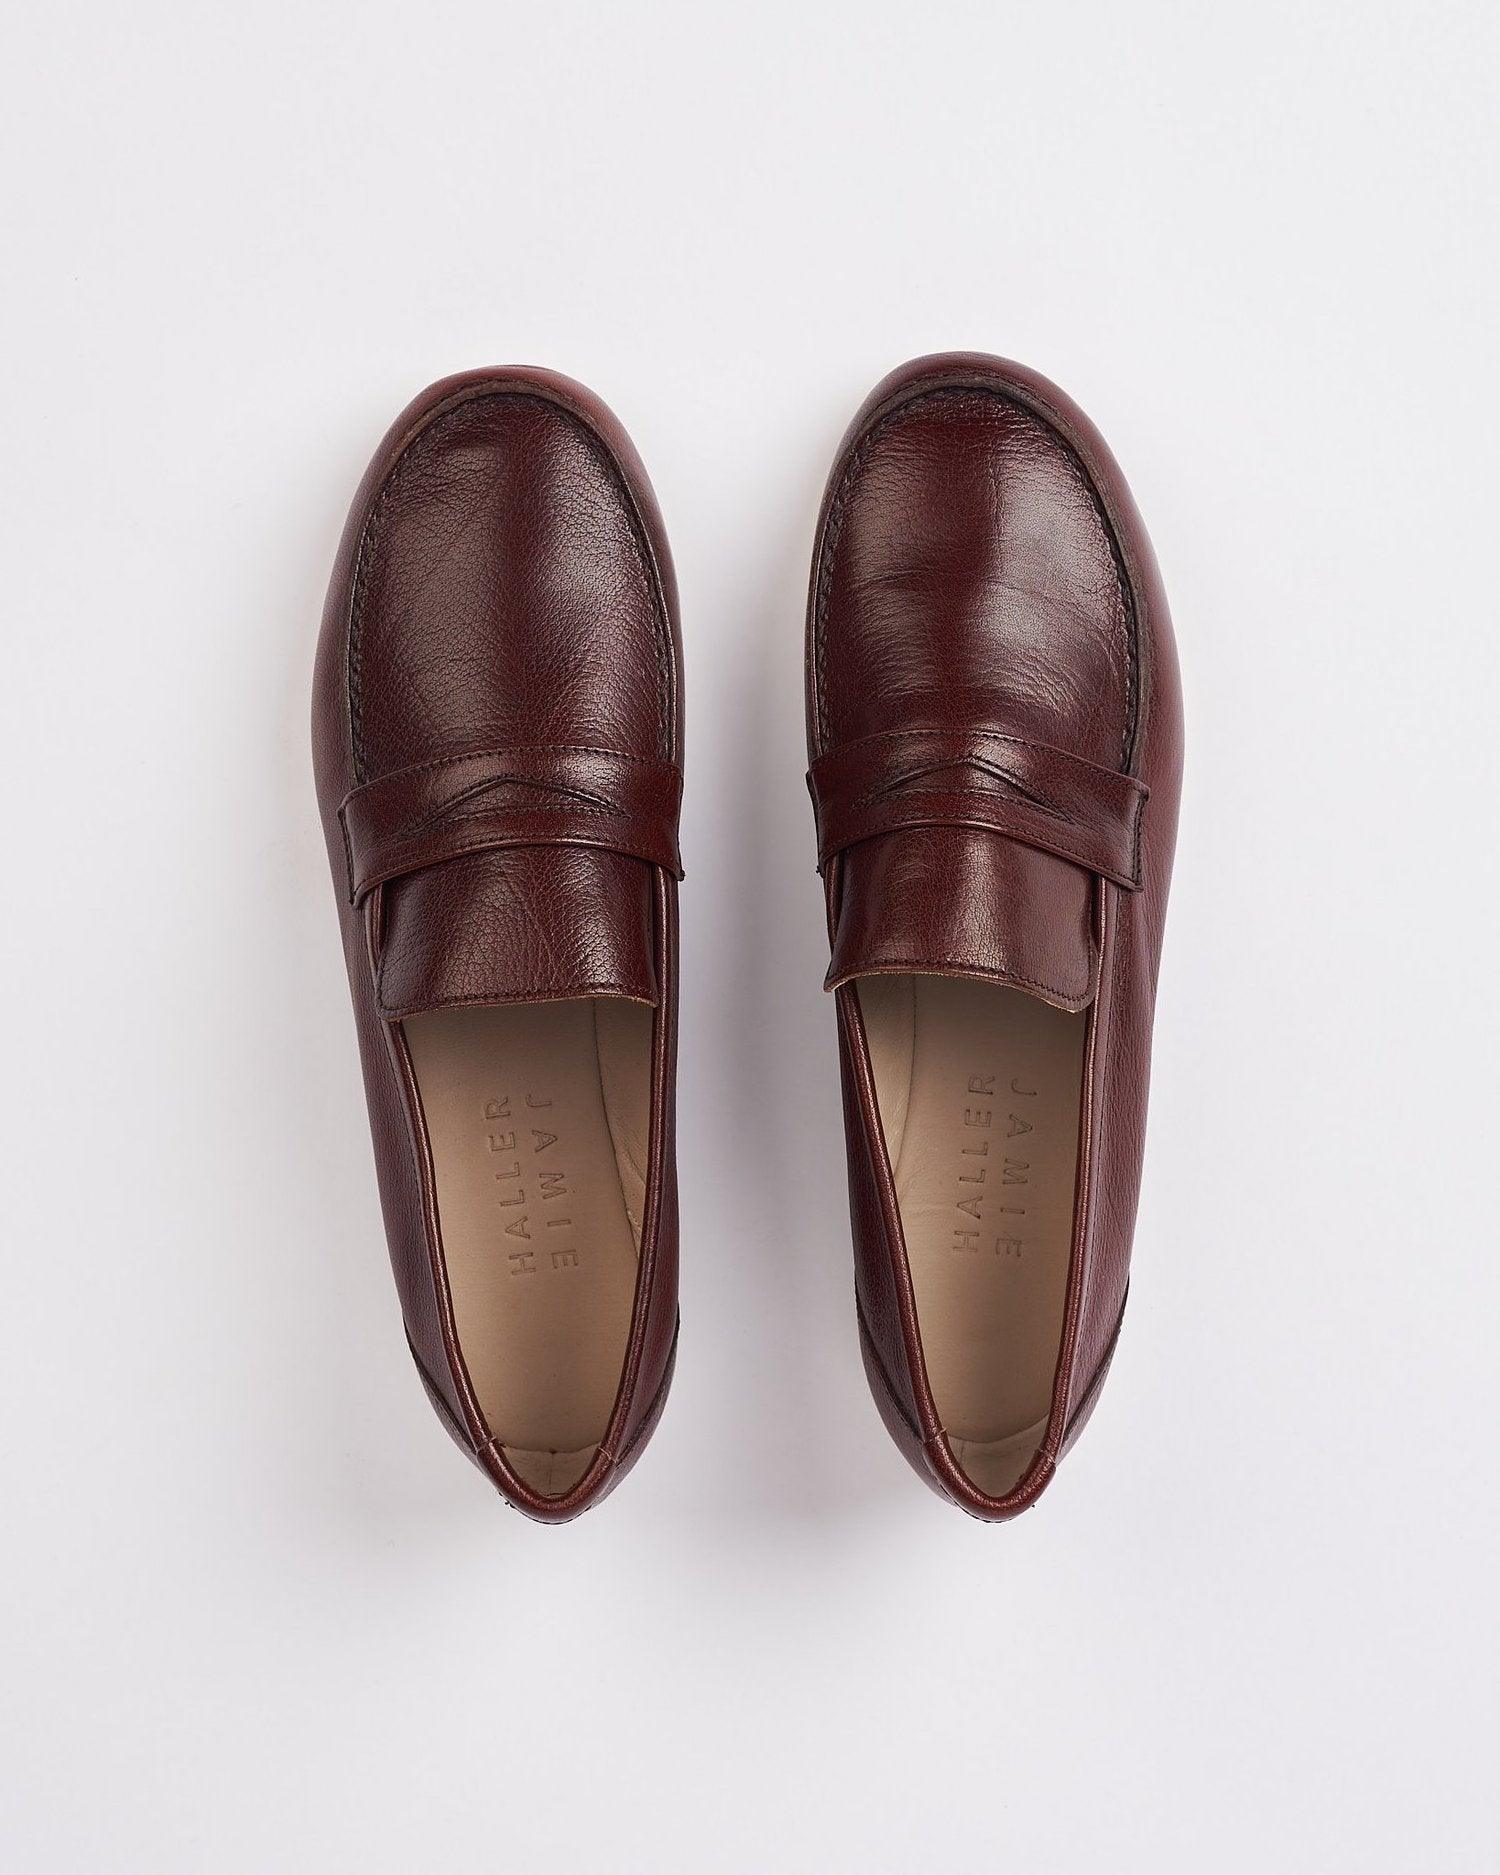 The Penny Loafer in Oxblood Flat View